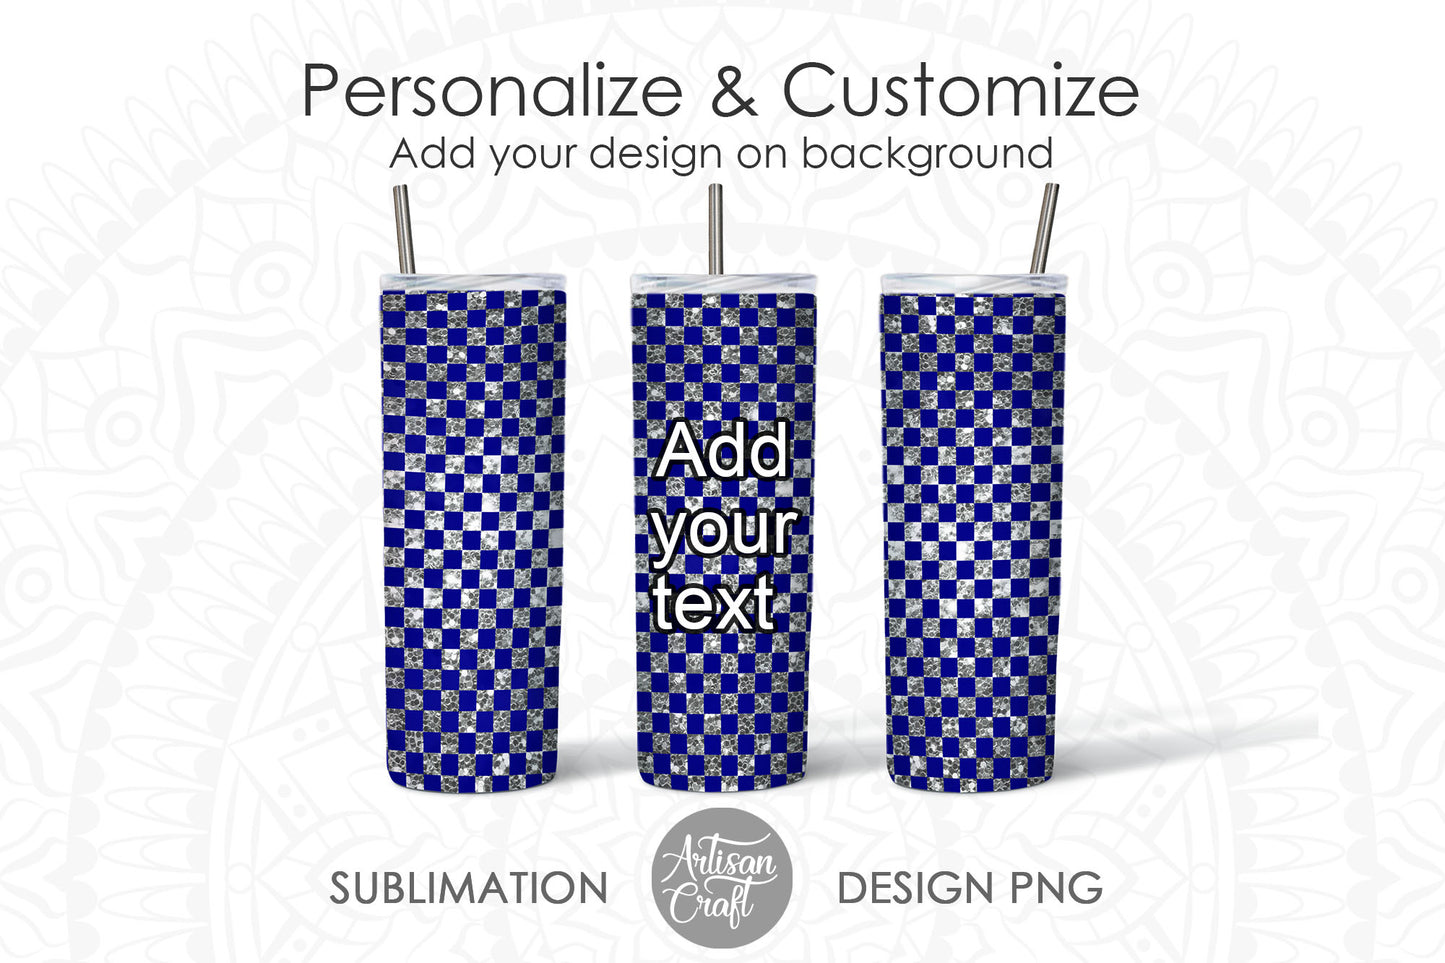 Tumbler sublimation with checkered pattern